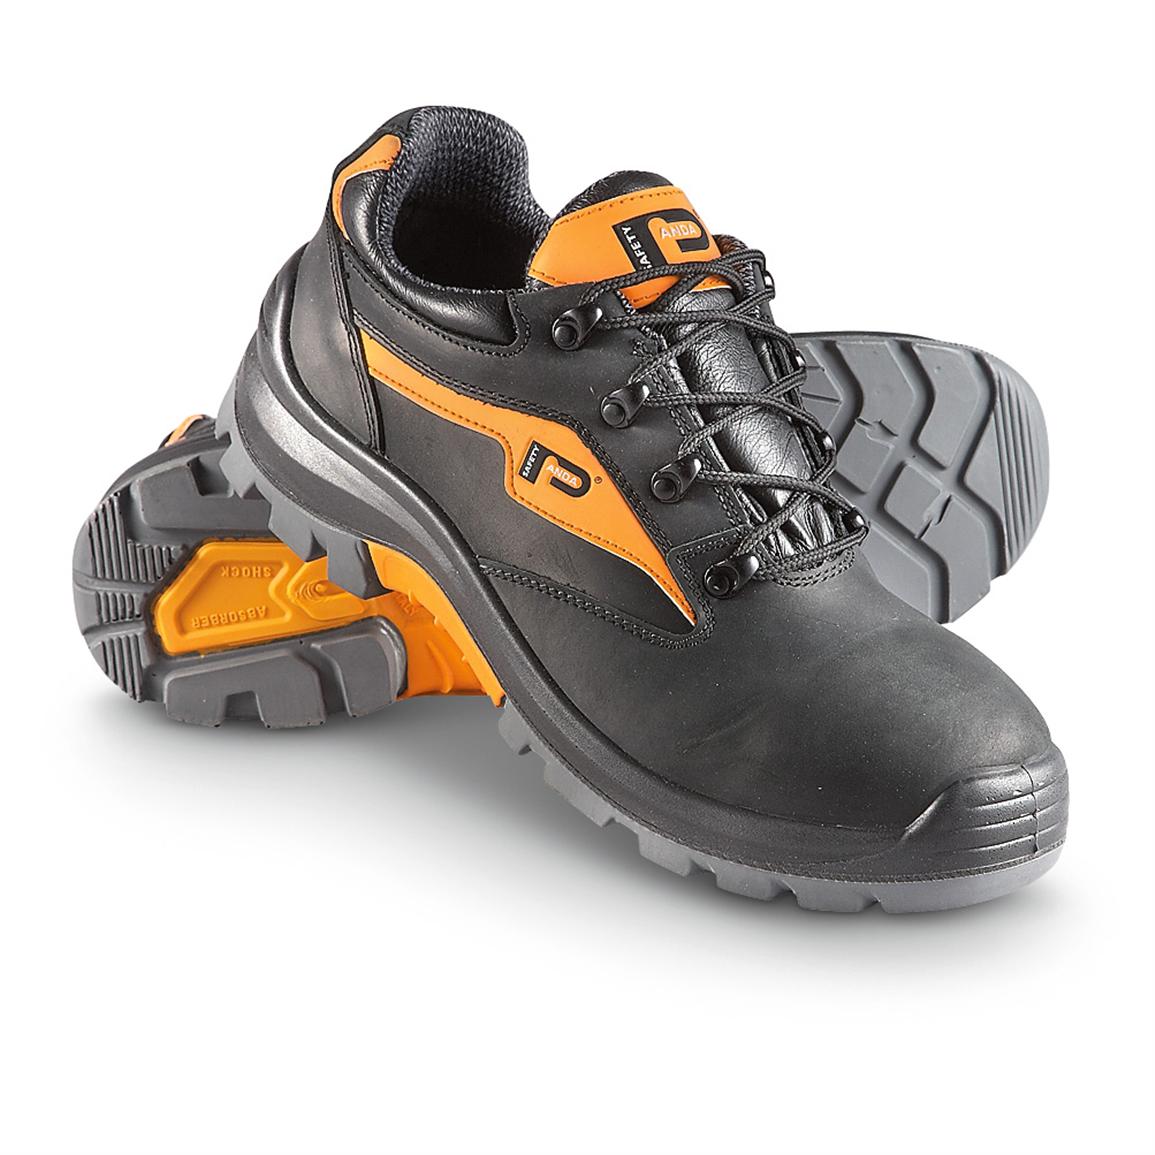 Men's Panda Italian Leather Safety Shoes,Black with Hi-vis ...